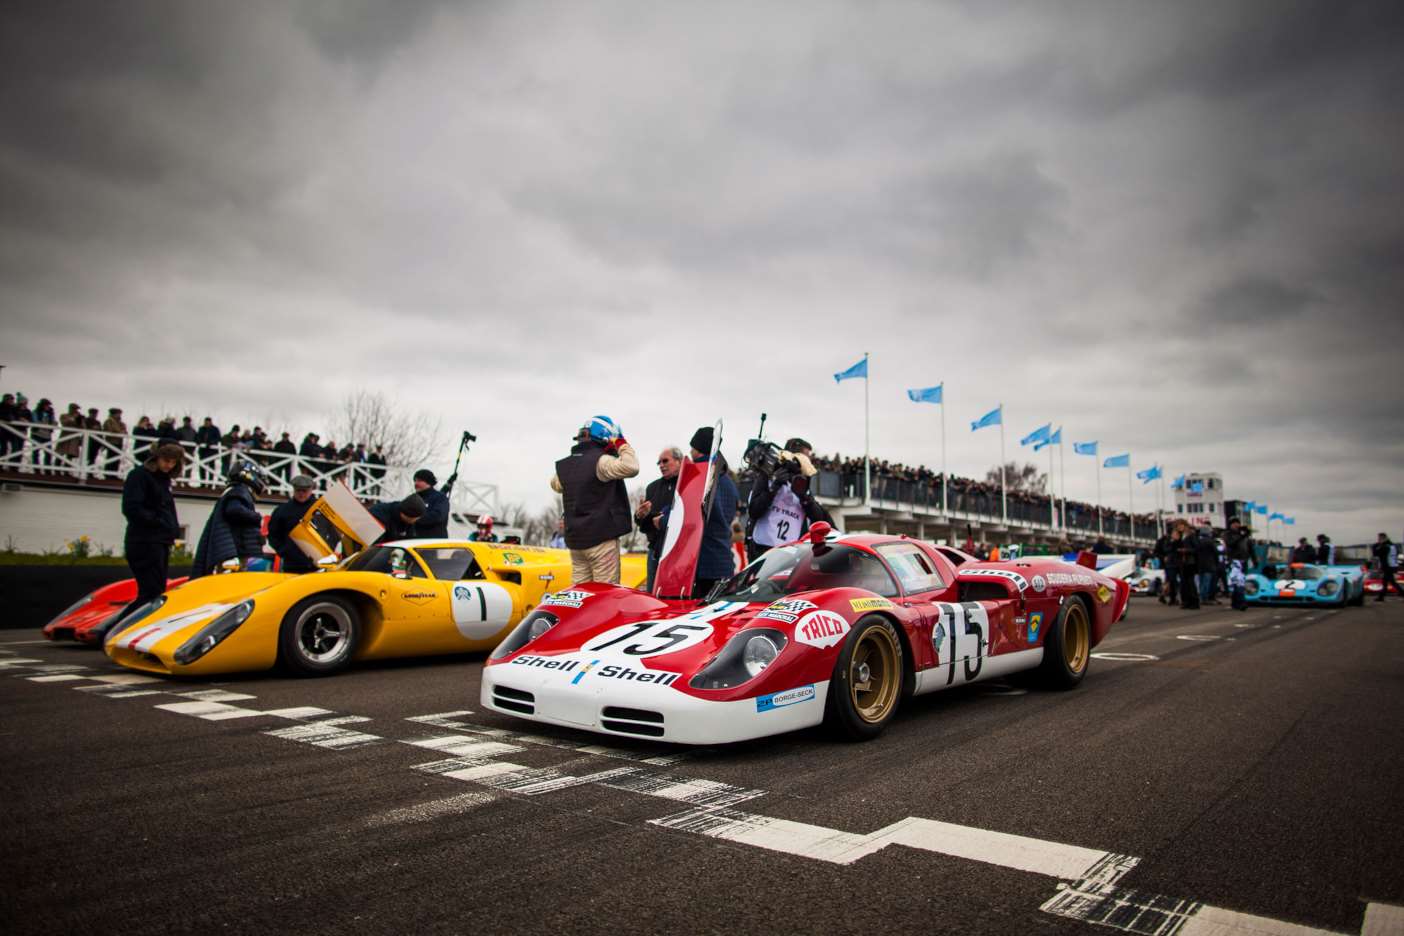 78th Goodwood Members’ Meeting moved to April 2021